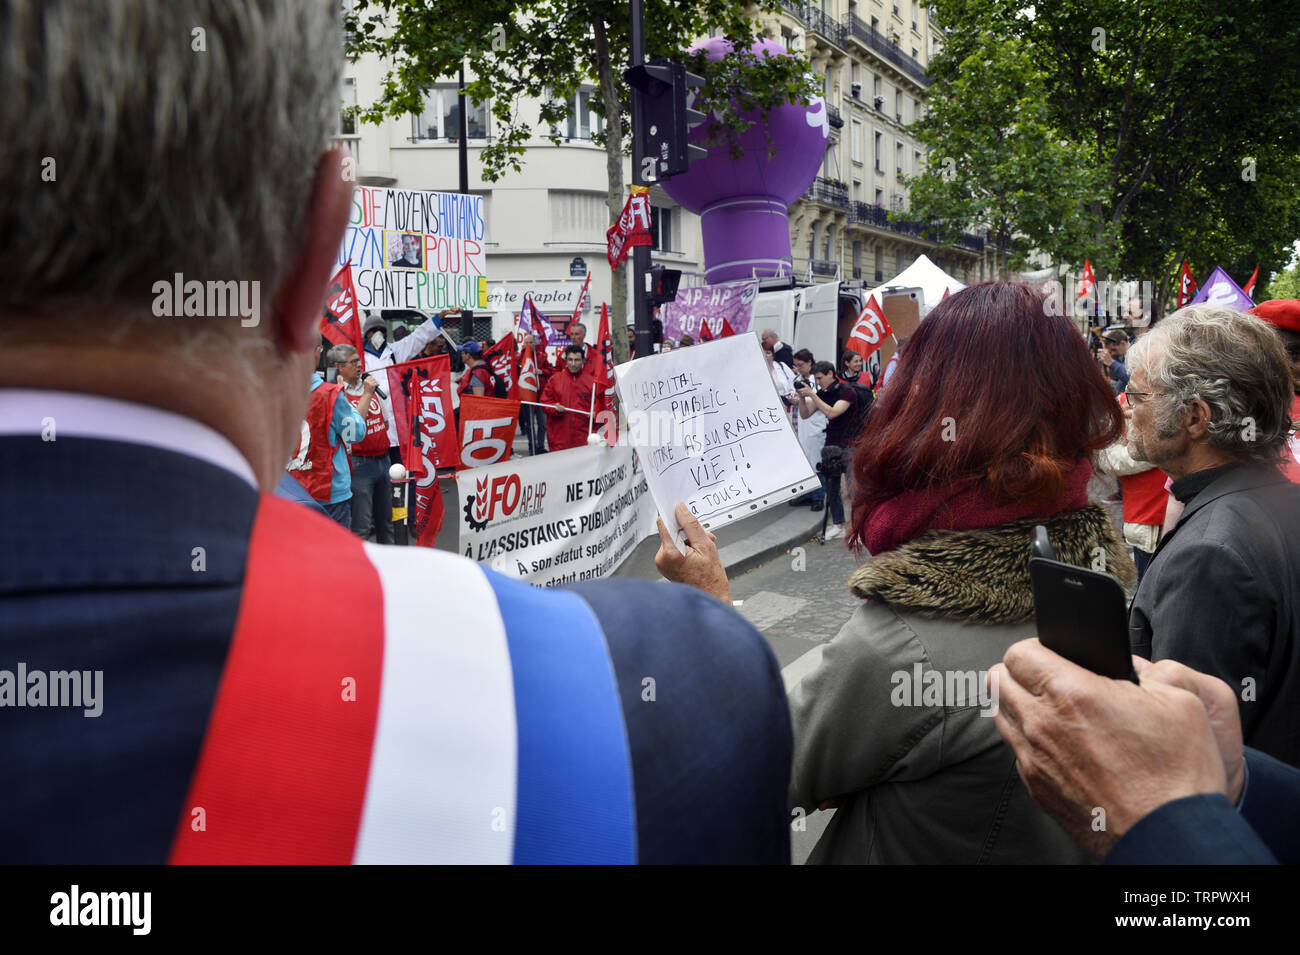 Emergency Health care workers protest in Paris - France Stock Photo